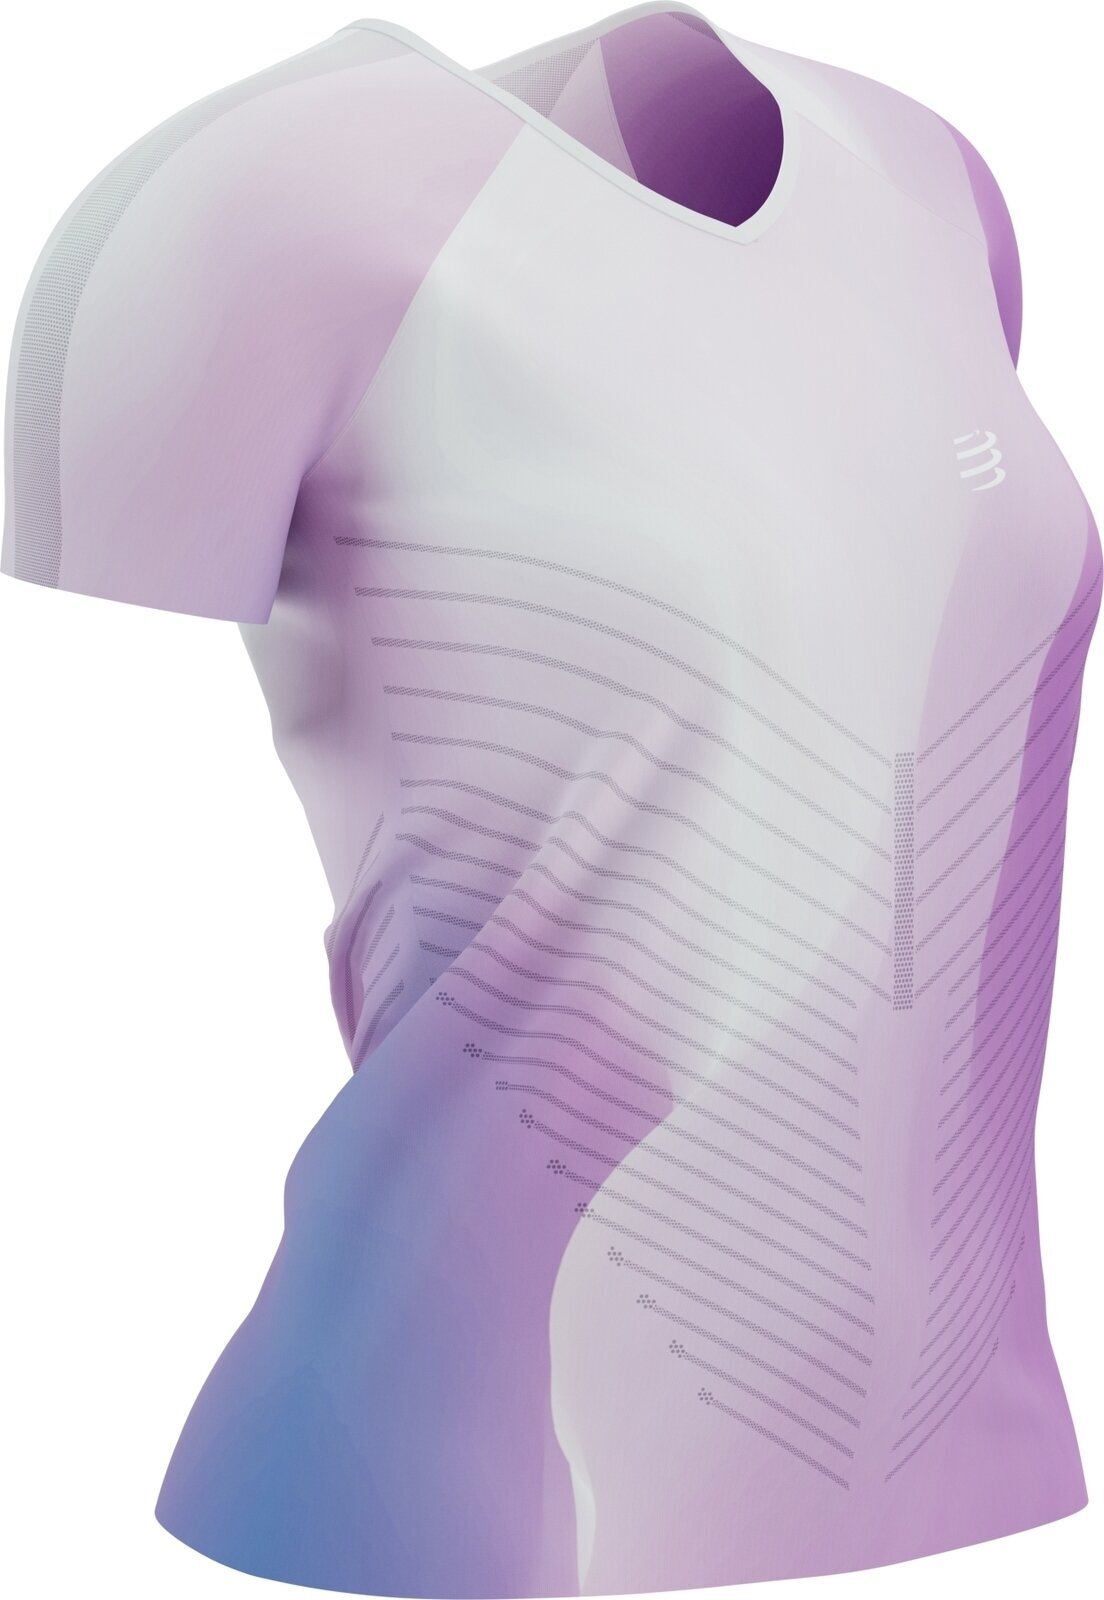 Running t-shirt with short sleeves
 Compressport Performance SS Tshirt W Royal Lilac/Lupine/White L Running t-shirt with short sleeves